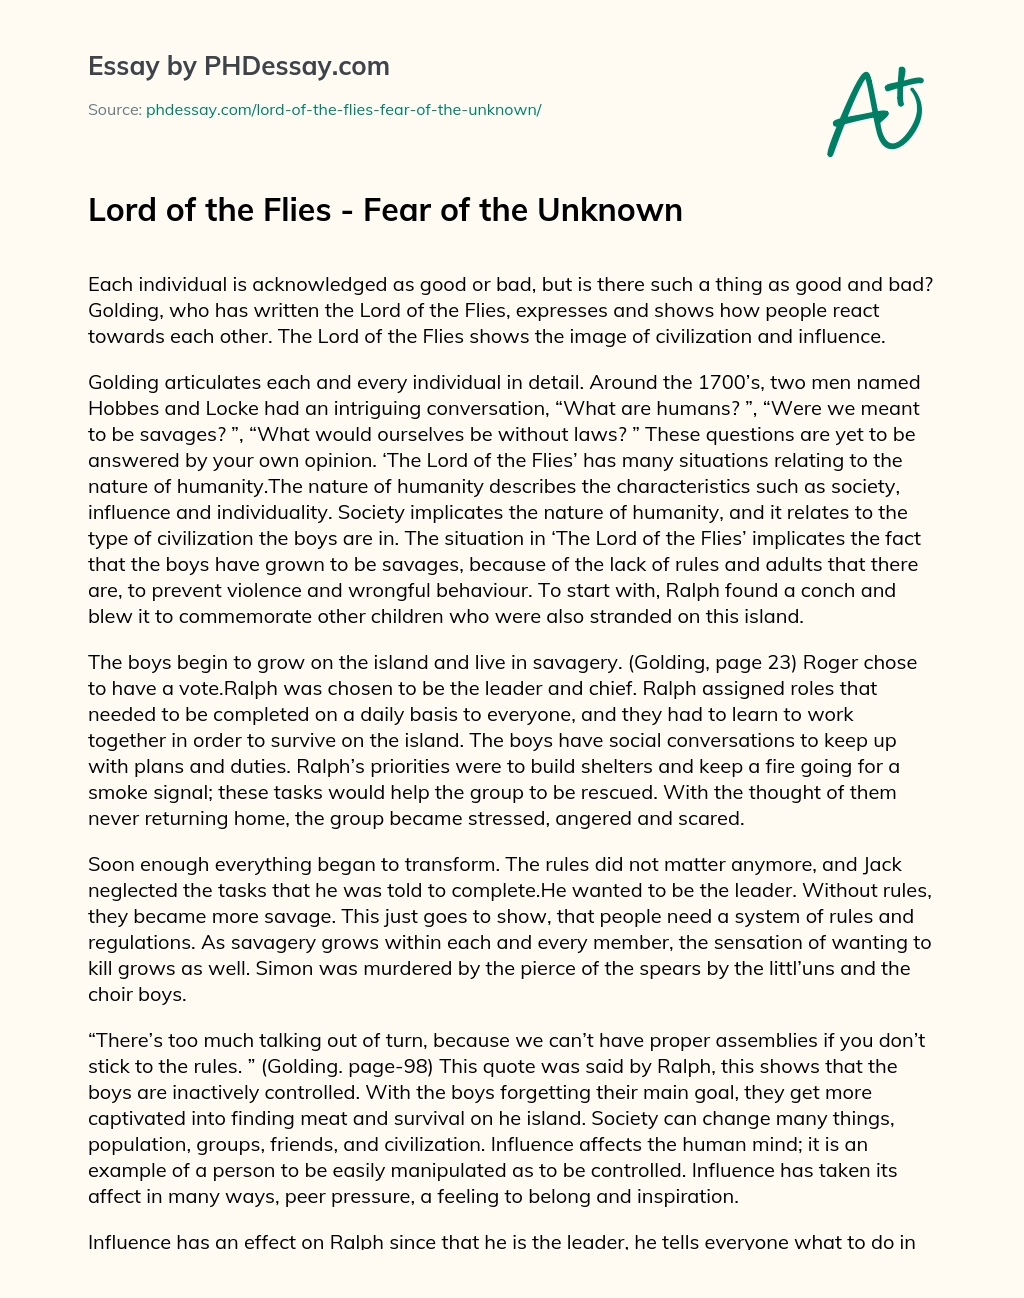 lord of the flies essay fear